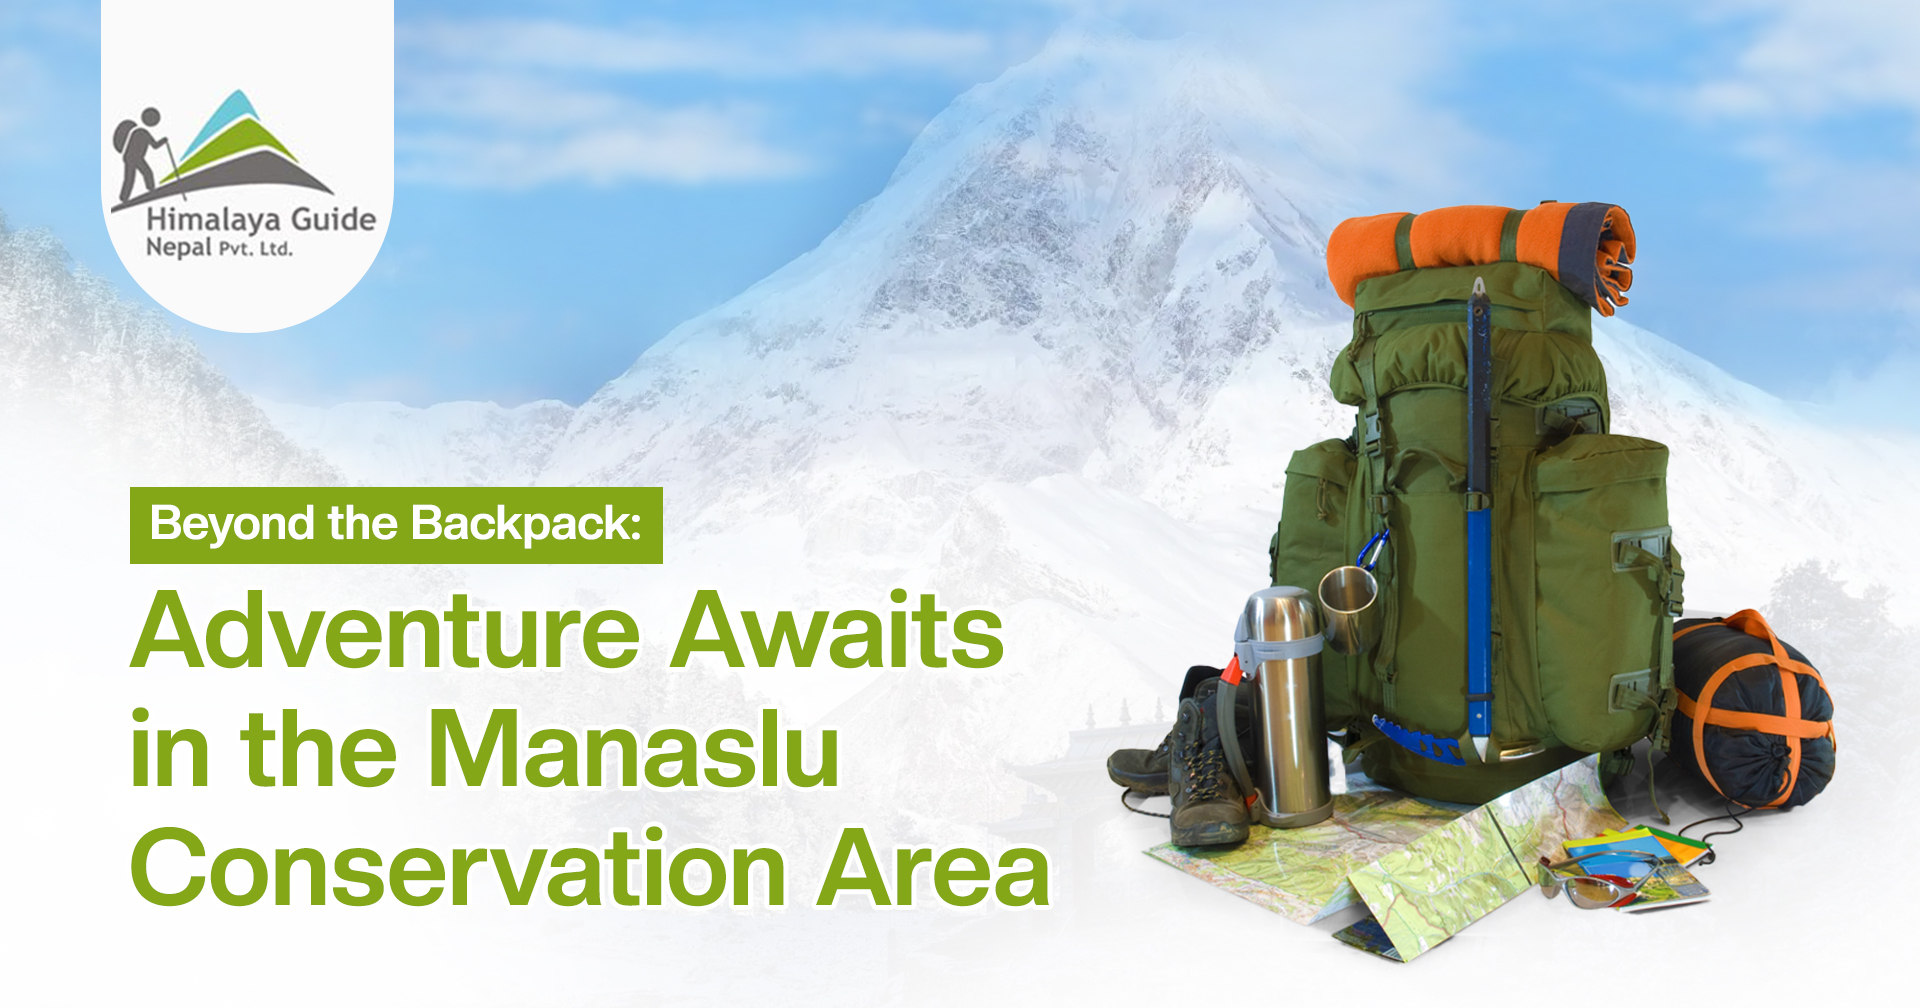 Beyond the Backpack: Adventure Awaits in the Manaslu Conservation Area